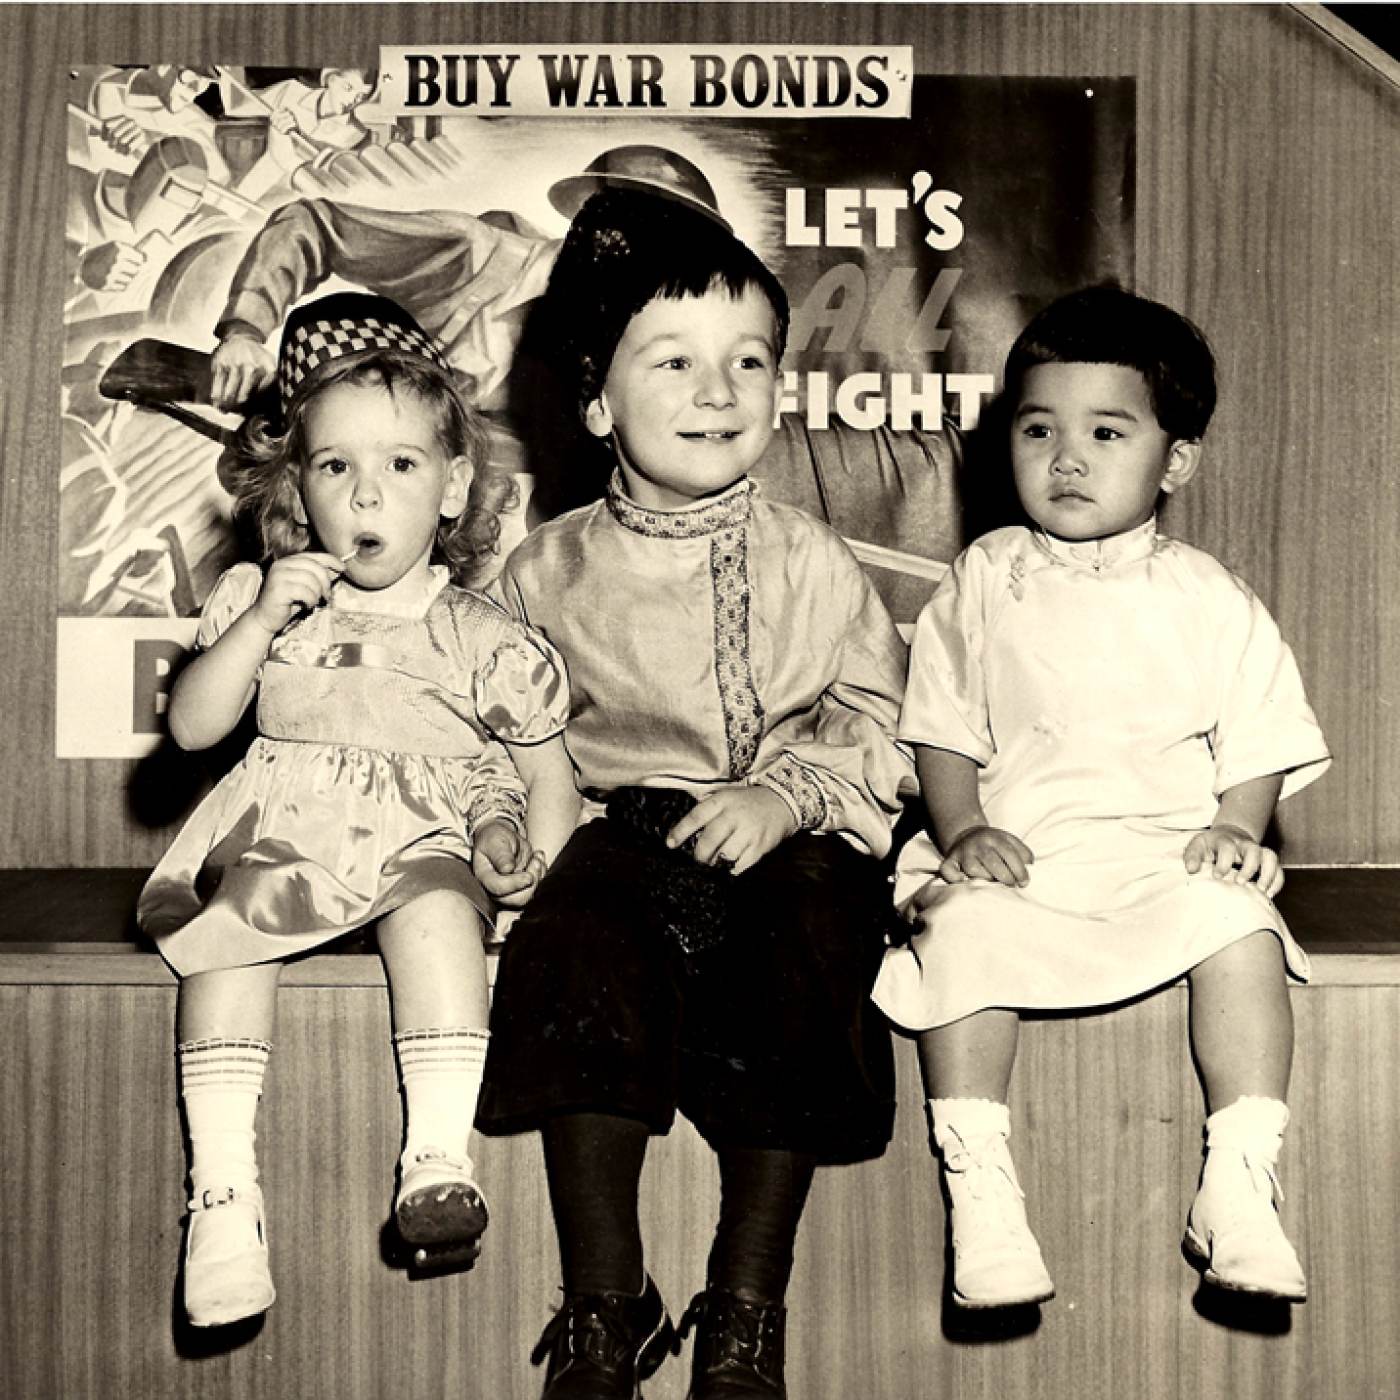 2004.029.007 Three children—one Scottish, one Russian, and one Chinese—were chosen by artist Margery Ryerson to be models for paintings to be used by the Ninth Federal Savings and Loan Association at 1457 Broadway, New York, NY to boost the sale of war bonds. The children are, from left to right: Susan Murray, of Stillwell Avenue, Brooklyn; Andriusha Branitzka, of 57th Street, Manhattan; and Virginia Chin (née Lee), of 73 Mulberry Street, Manhattan. Photograph taken by Larry Gordon. Courtesy of Virginia S. Chin, Museum of Chinese in America (MOCA) Collection. 三个孩子—一个苏格兰人、一个俄罗斯人和一个中国人—被艺术家 Margery Ryerson 选为纽约州百老汇 1457 号第九联邦储蓄和贷款协会的绘画模特，以促进出售战争债券。孩子们从左到右是：布鲁克林斯蒂威尔大道的苏珊·默里；曼哈顿第 57 街的 Andriusha Branitzka；曼哈顿茂比利街 73 号的 Virginia Chin (née Lee)。照片由拉里·戈登拍摄。由Virginia S. Chin捐赠，美国华人博物馆 (MOCA) 馆藏。